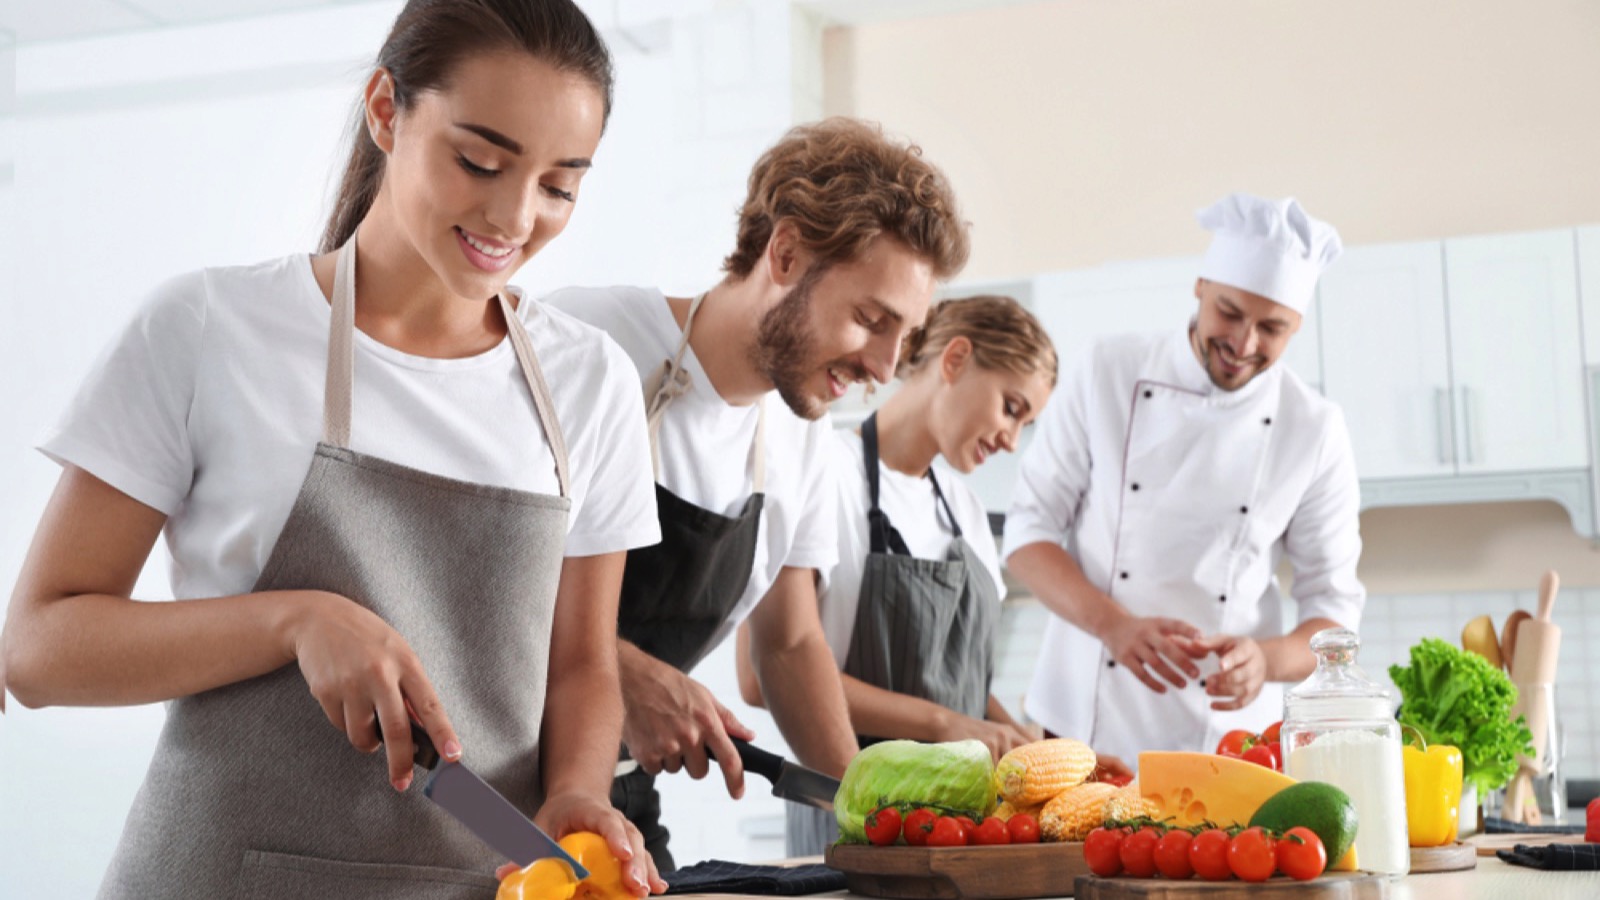 Students in cooking class